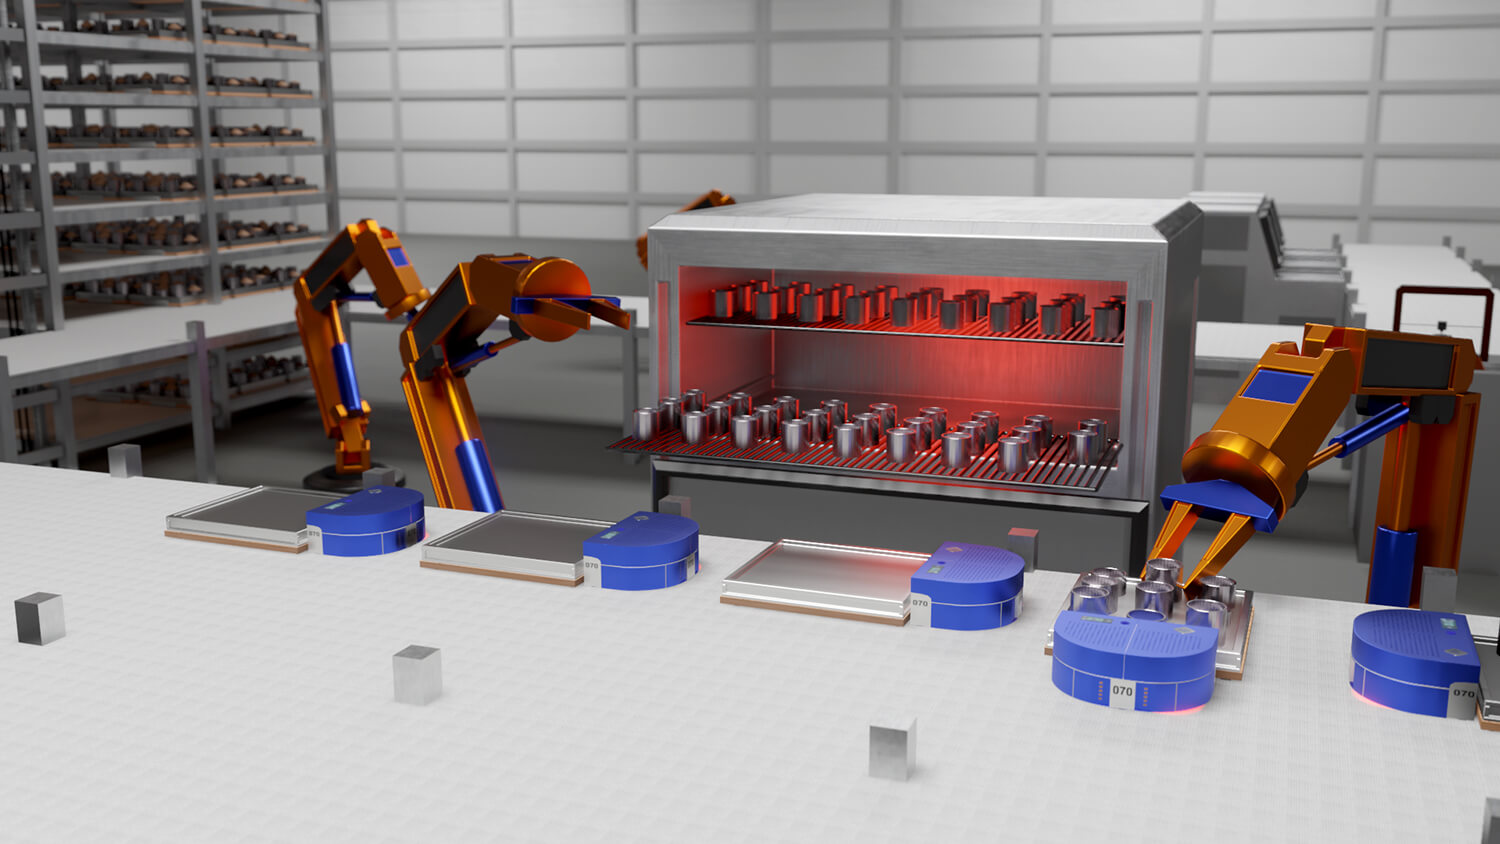 Production Automation - The Building Blocks